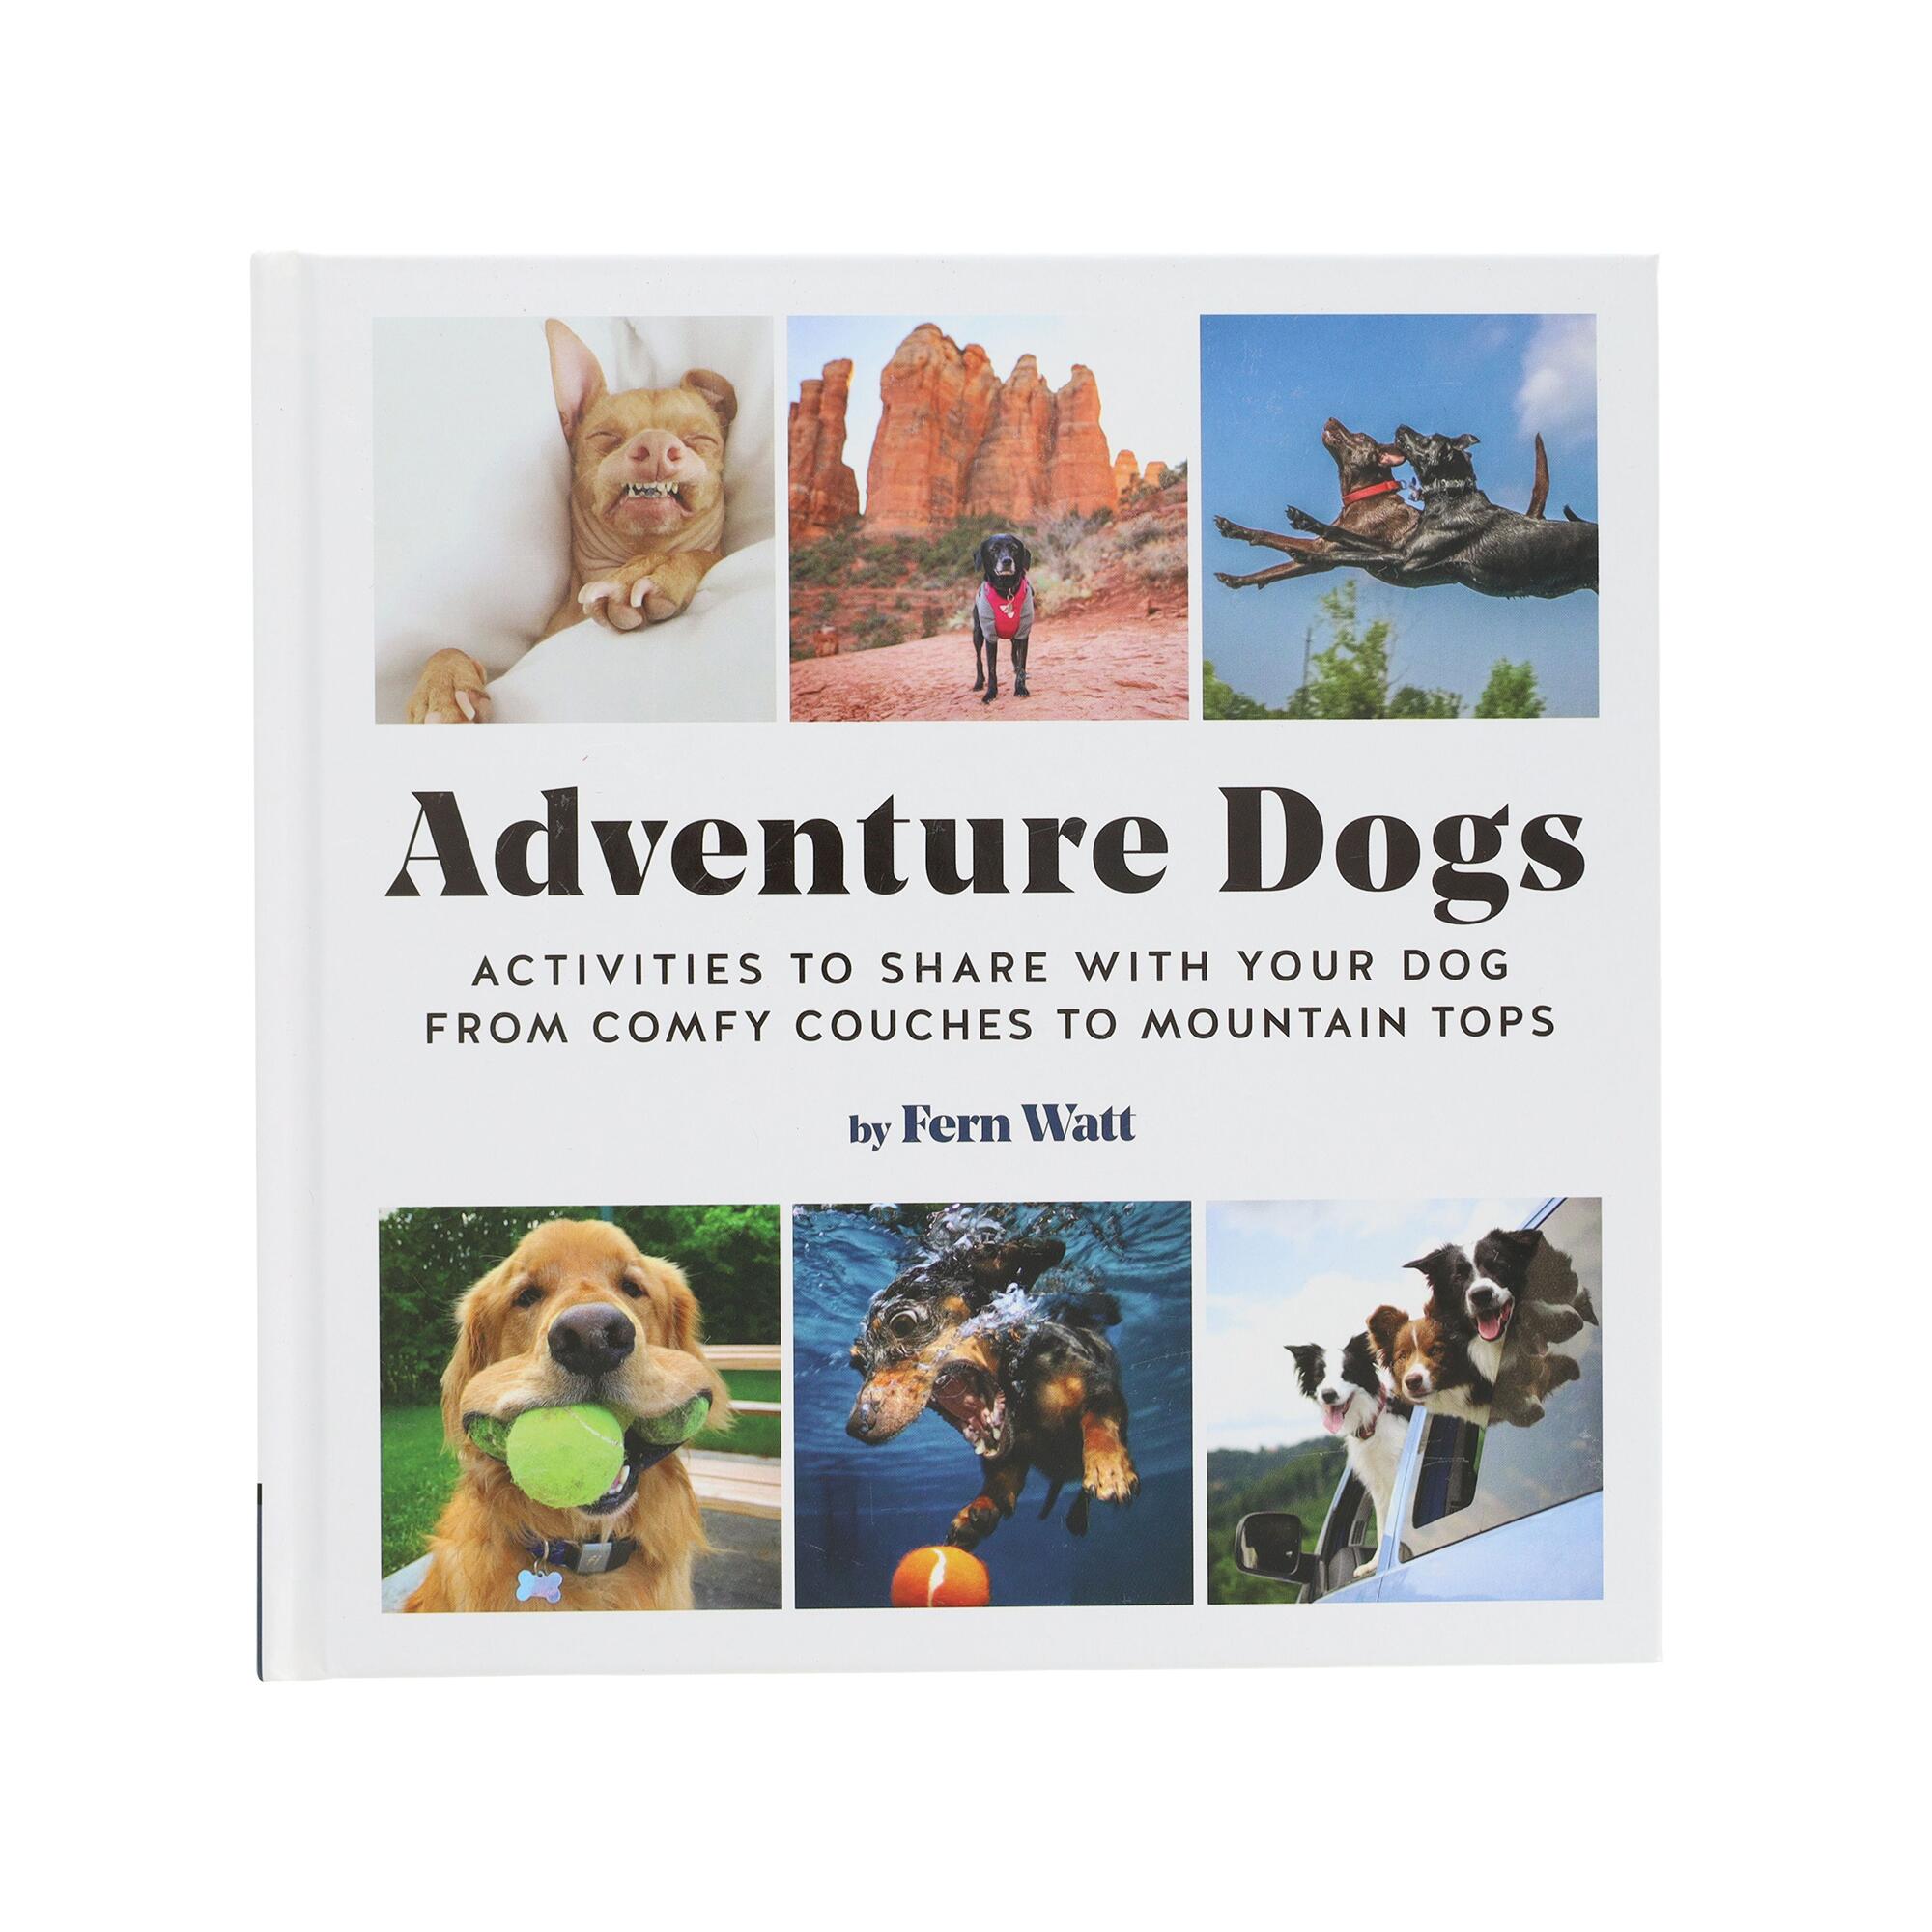 The cover of "Adventure Dogs"